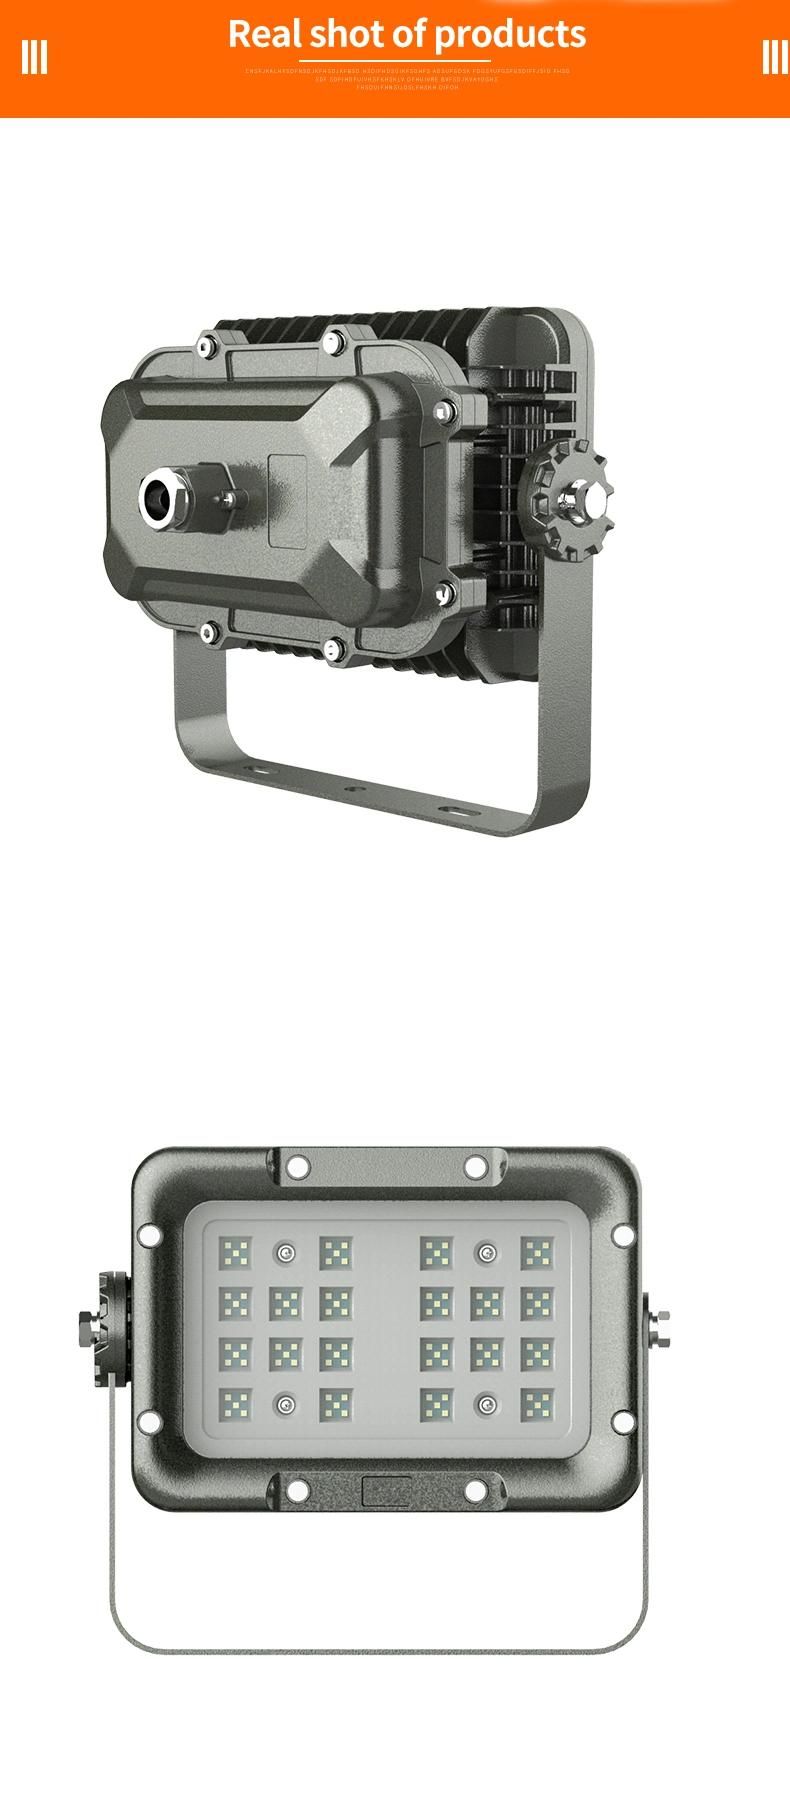 Class 1 Divison 2 Atex Certified IP66 Station LED Explosion Proof Flood Light